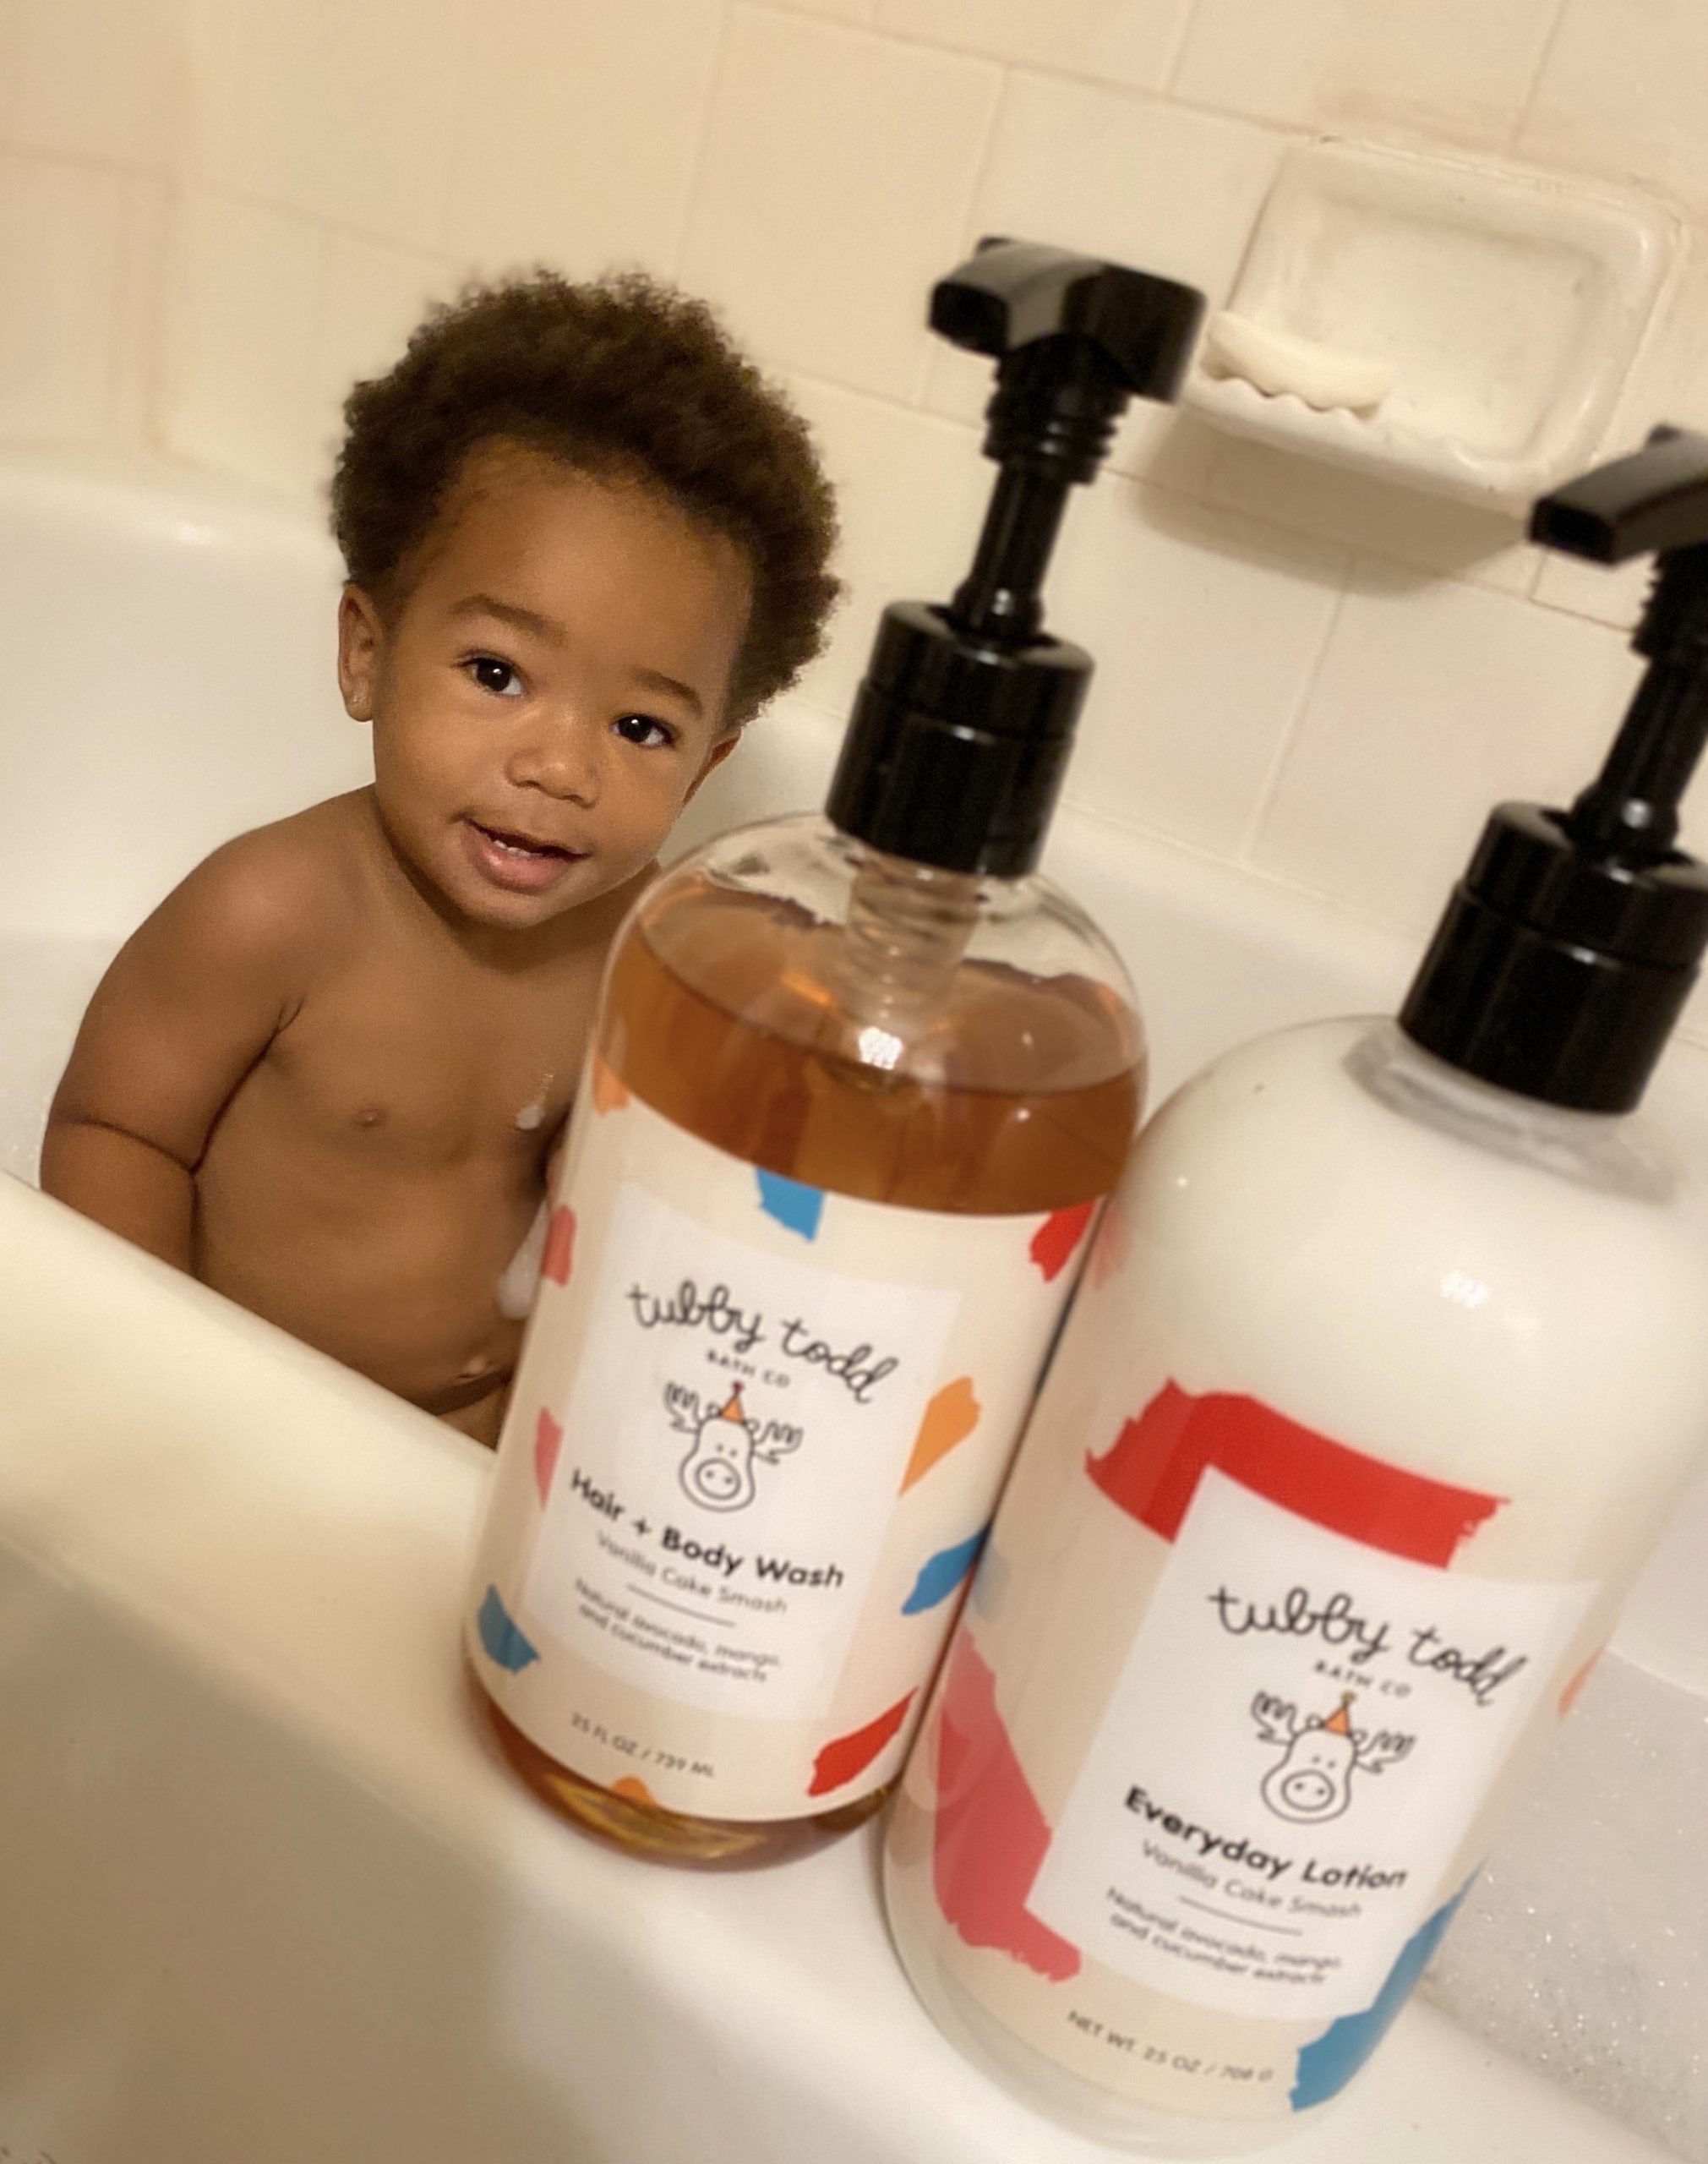 Tubby Todd Hair & Body Wash And Lotion